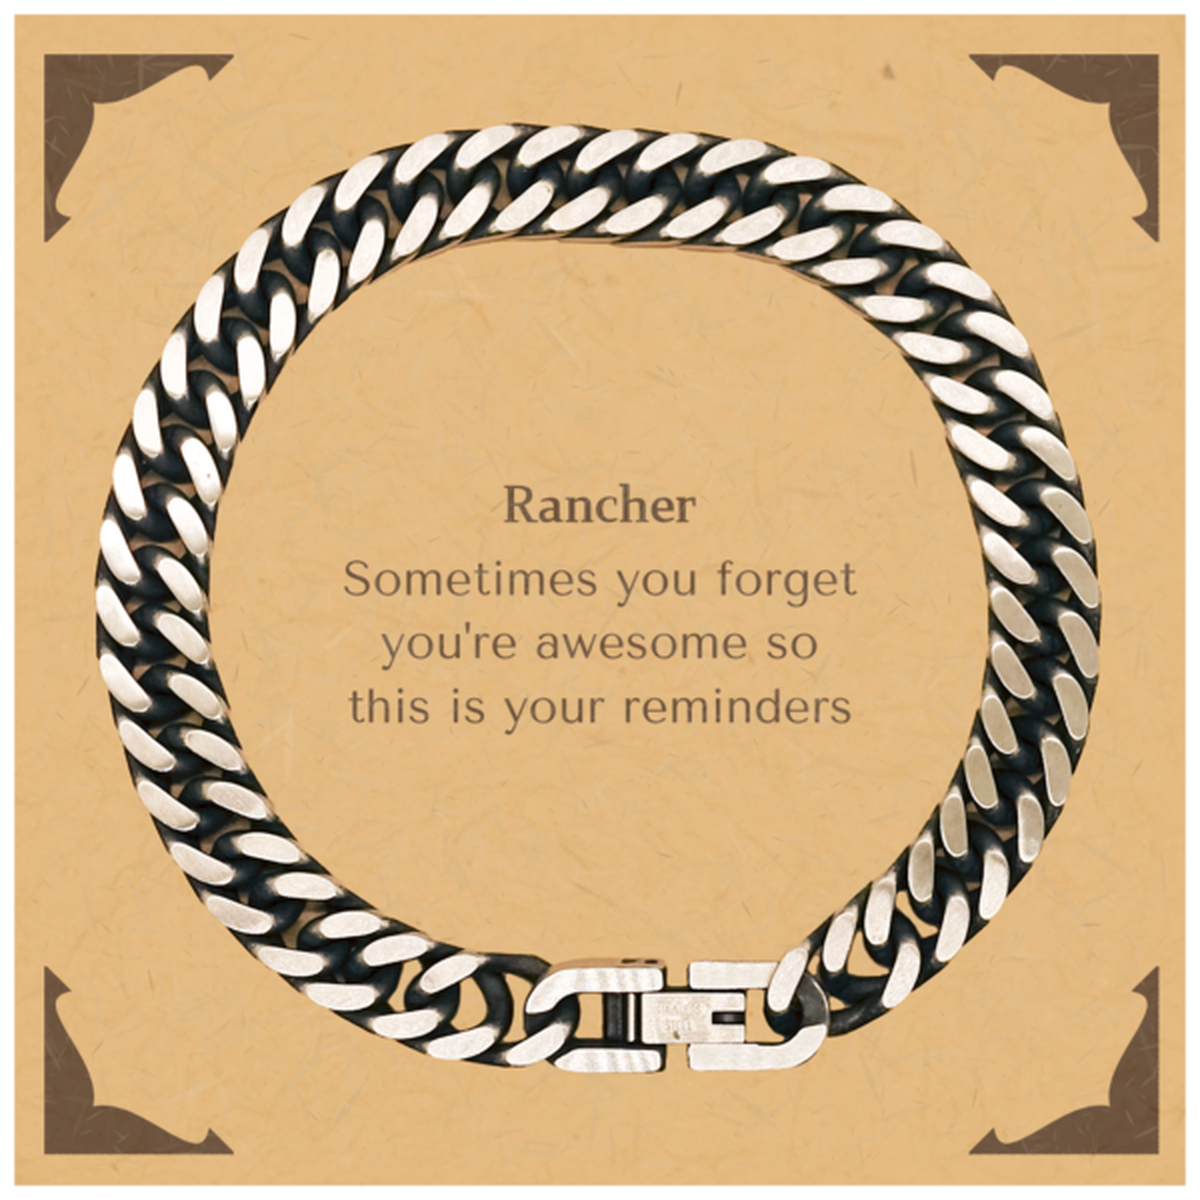 Sentimental Rancher Cuban Link Chain Bracelet, Rancher Sometimes you forget you're awesome so this is your reminders, Graduation Christmas Birthday Gifts for Rancher, Men, Women, Coworkers